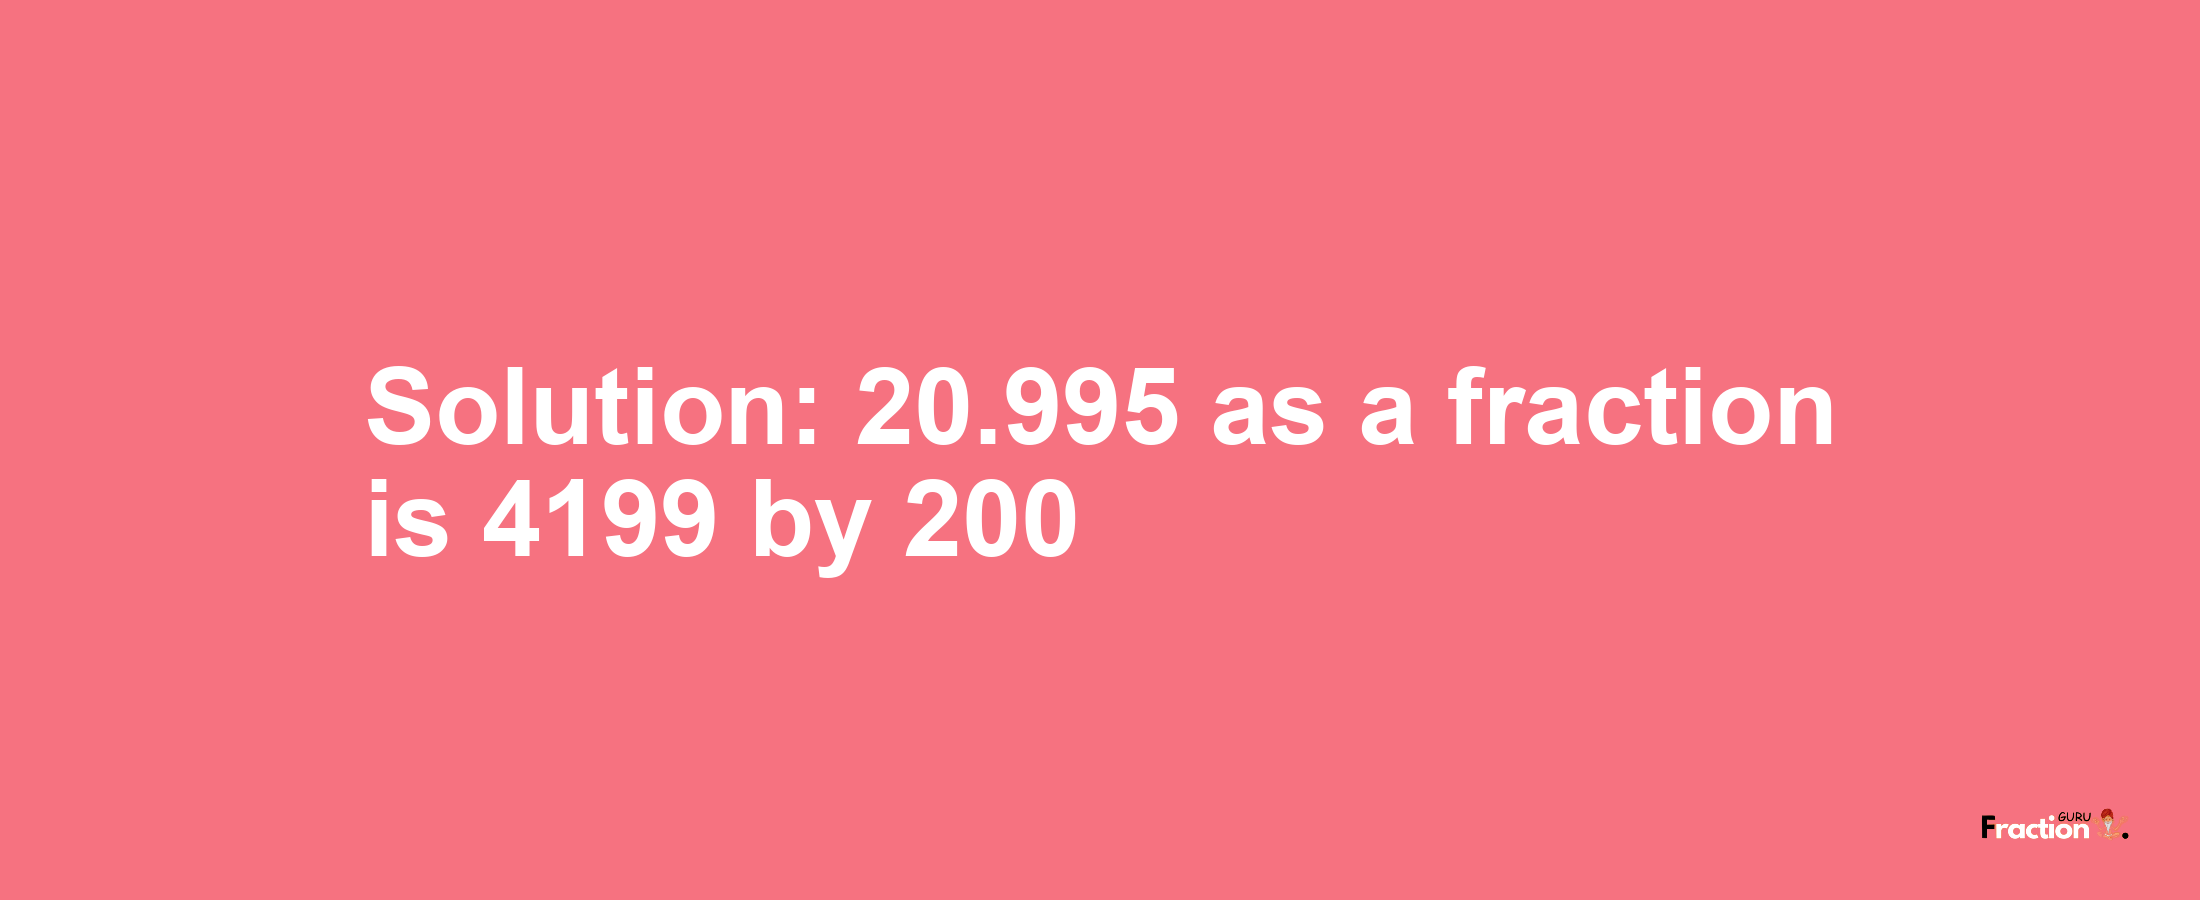 Solution:20.995 as a fraction is 4199/200